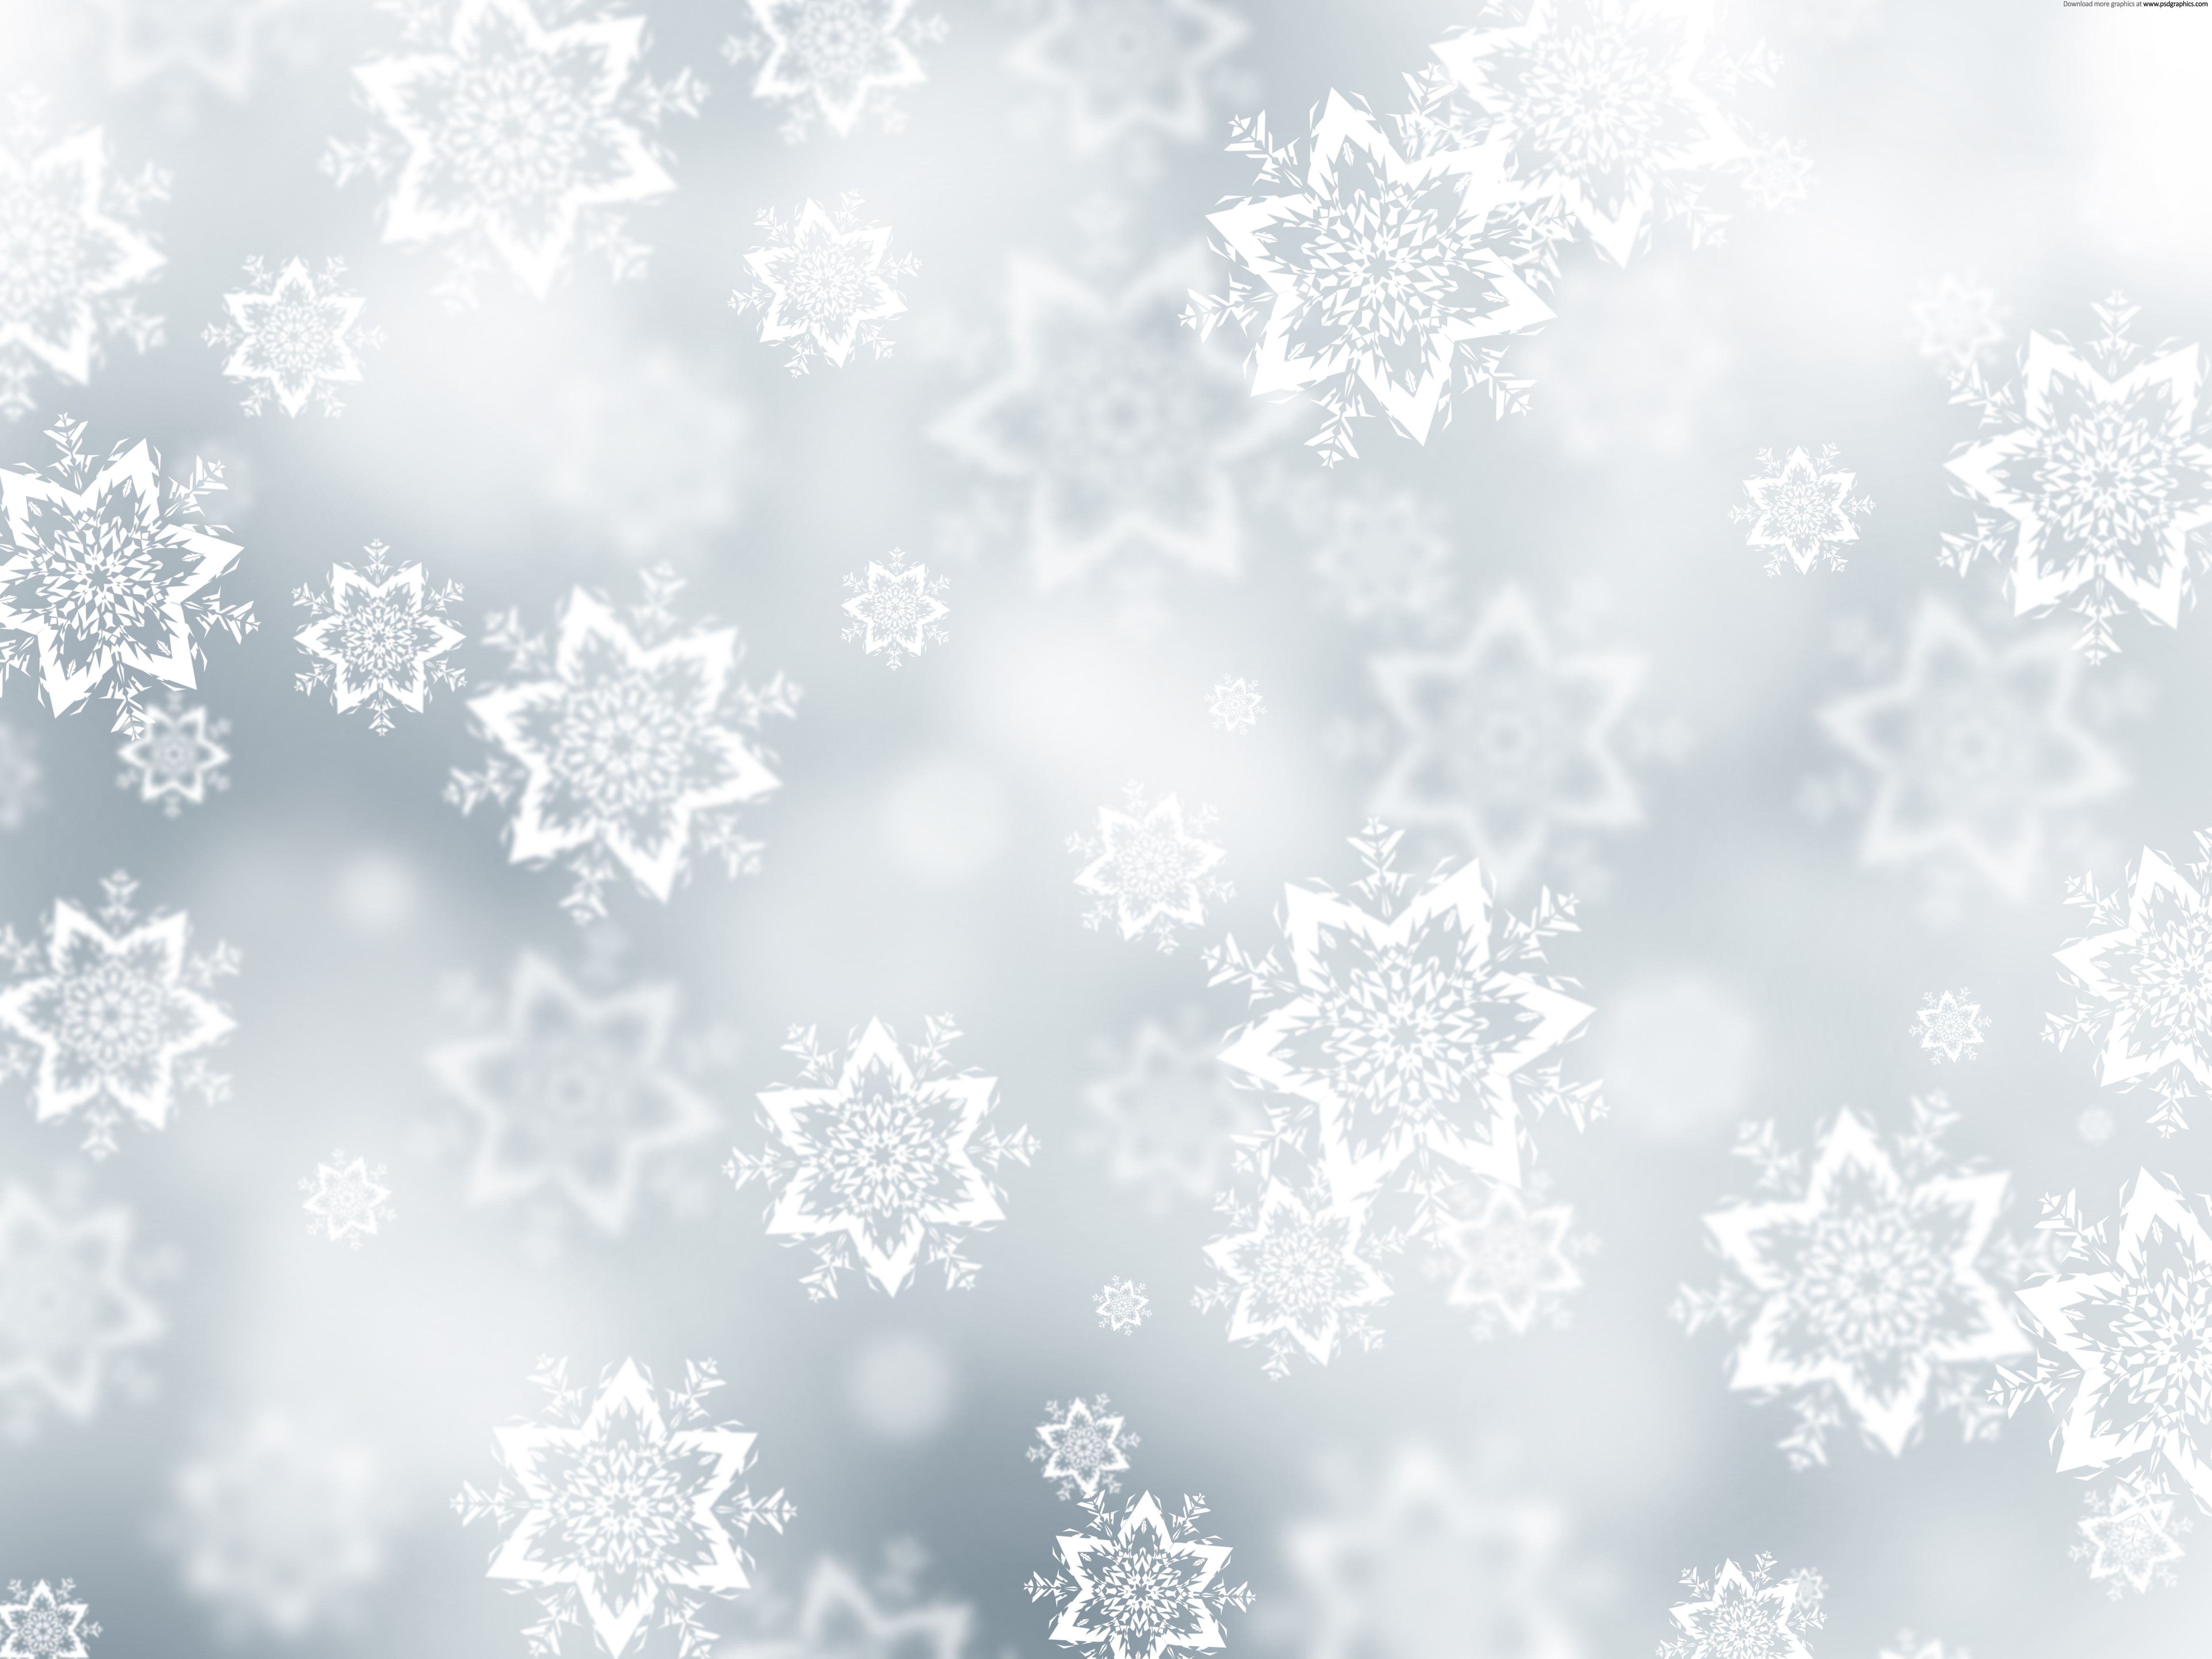 15 Free Photoshop Christmas Backgrounds Snow Images   Snowflake